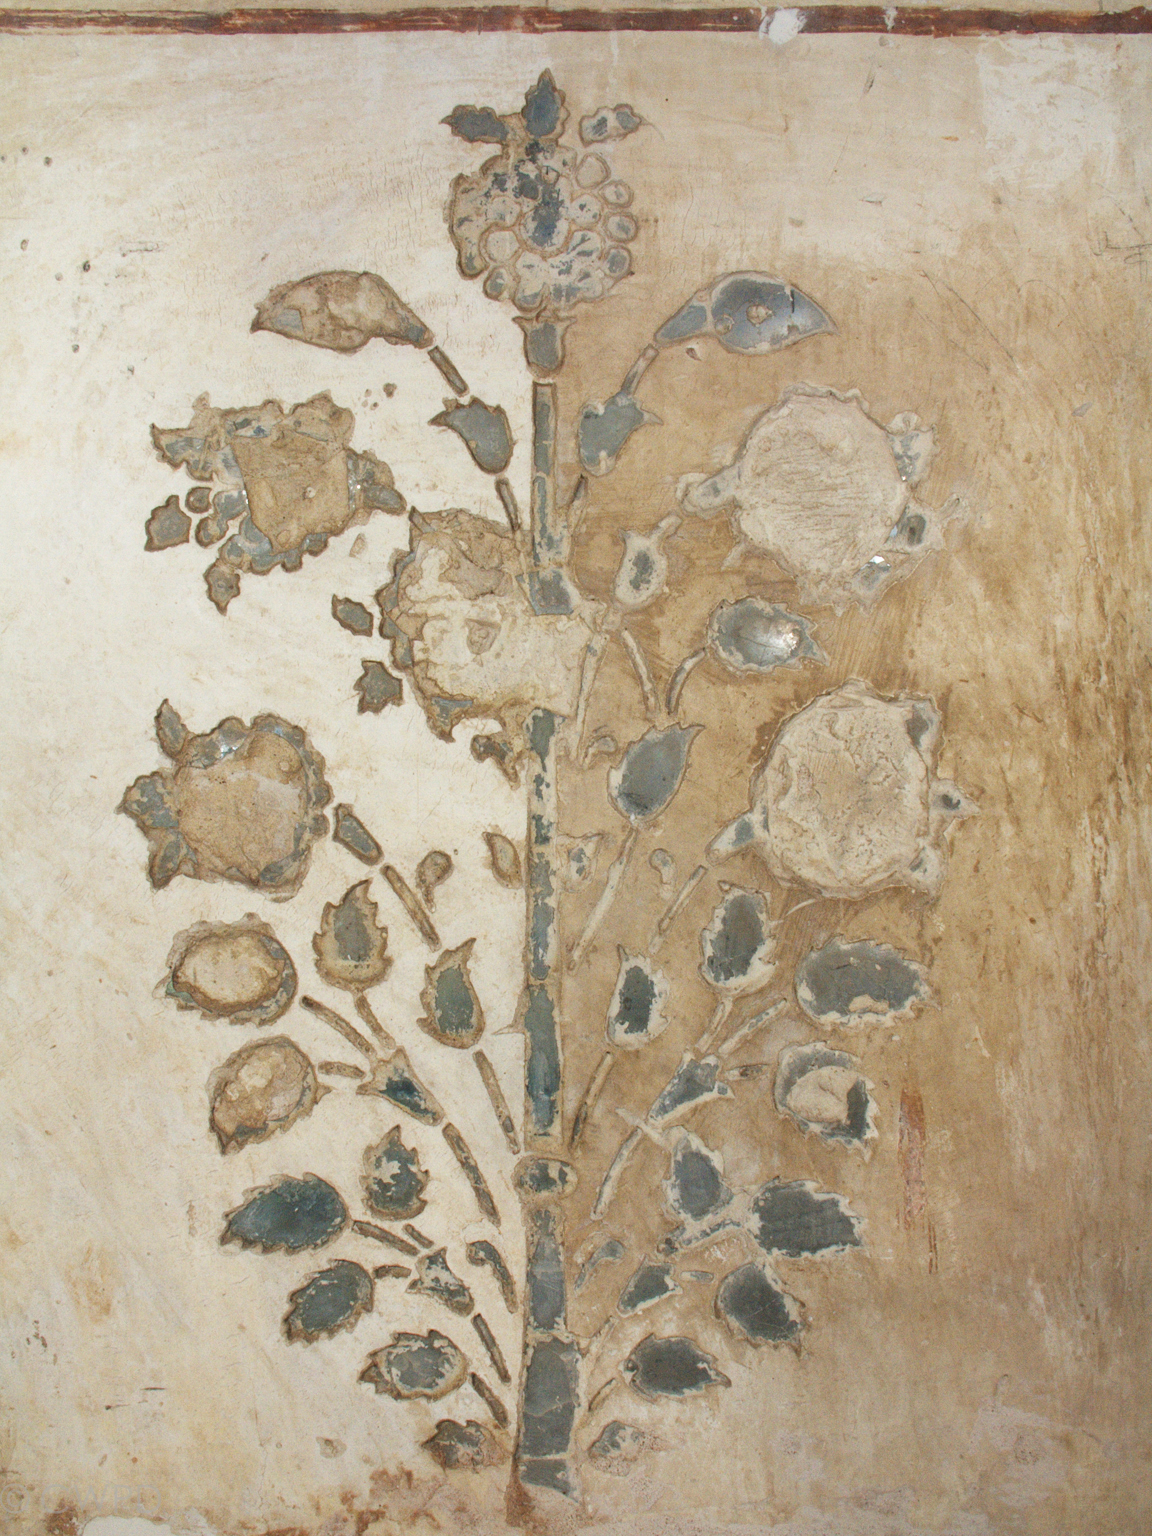  Example of the inlaid mirror work from which the palace derives its name. The image shows the  araish  during cleaning. A thick brownish-yellow dirt layer has been removed from the left side of the plaster but remains on the right side.&nbsp;  Image